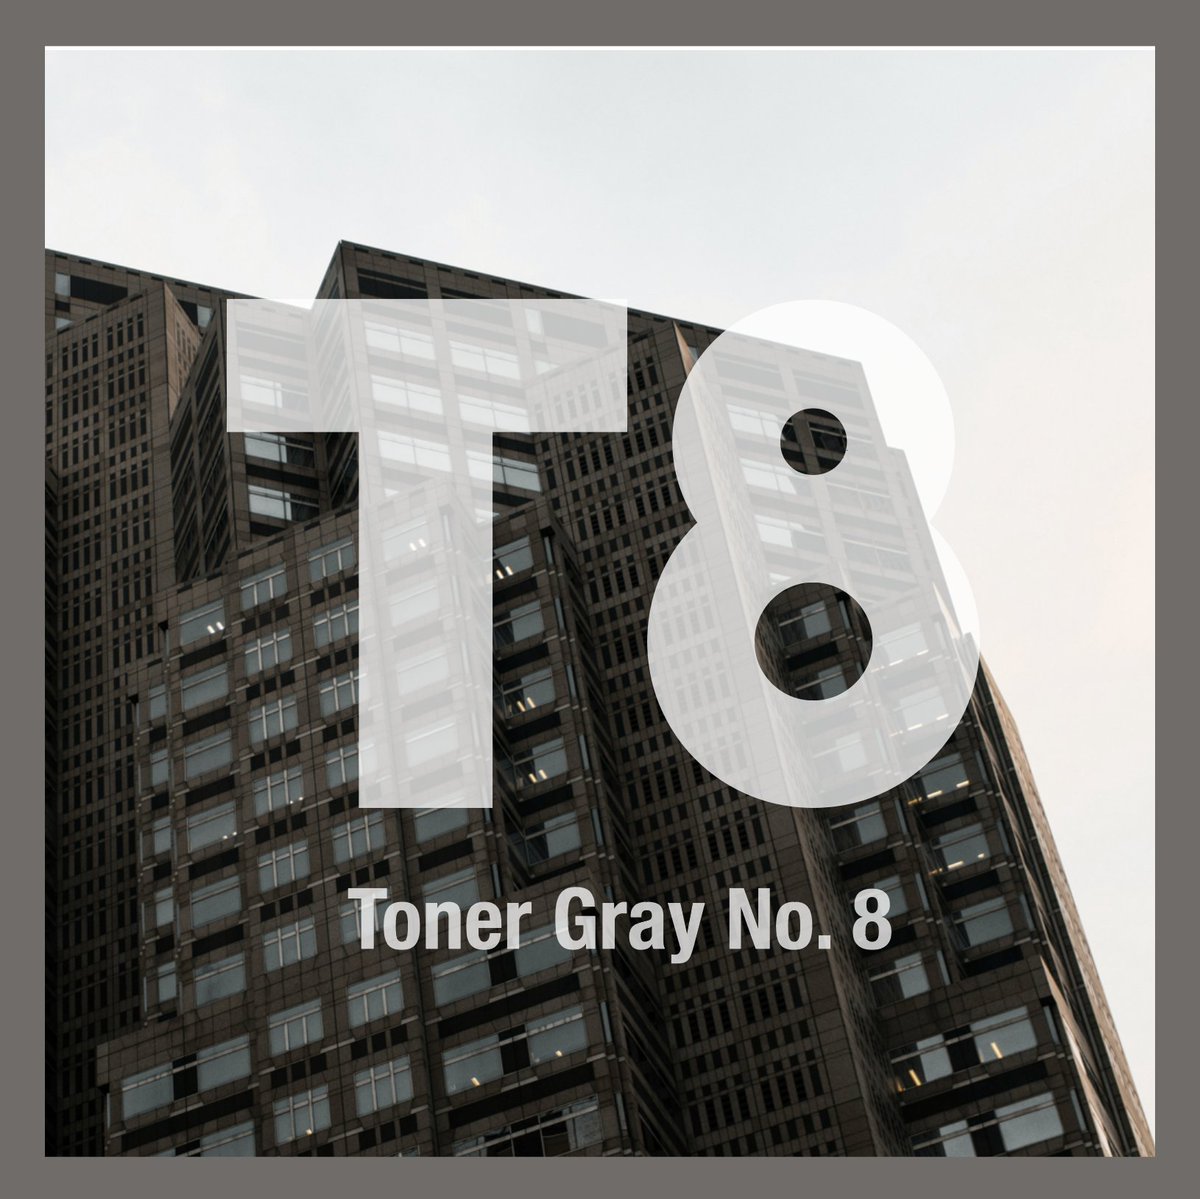 T8- Toner Gray No.8 T8 represents the third darkest shade of Toner Gray. The 'Toner Gray' name originates from the initial purpose of Copic markers, which was to add colors on printouts from office copiers!